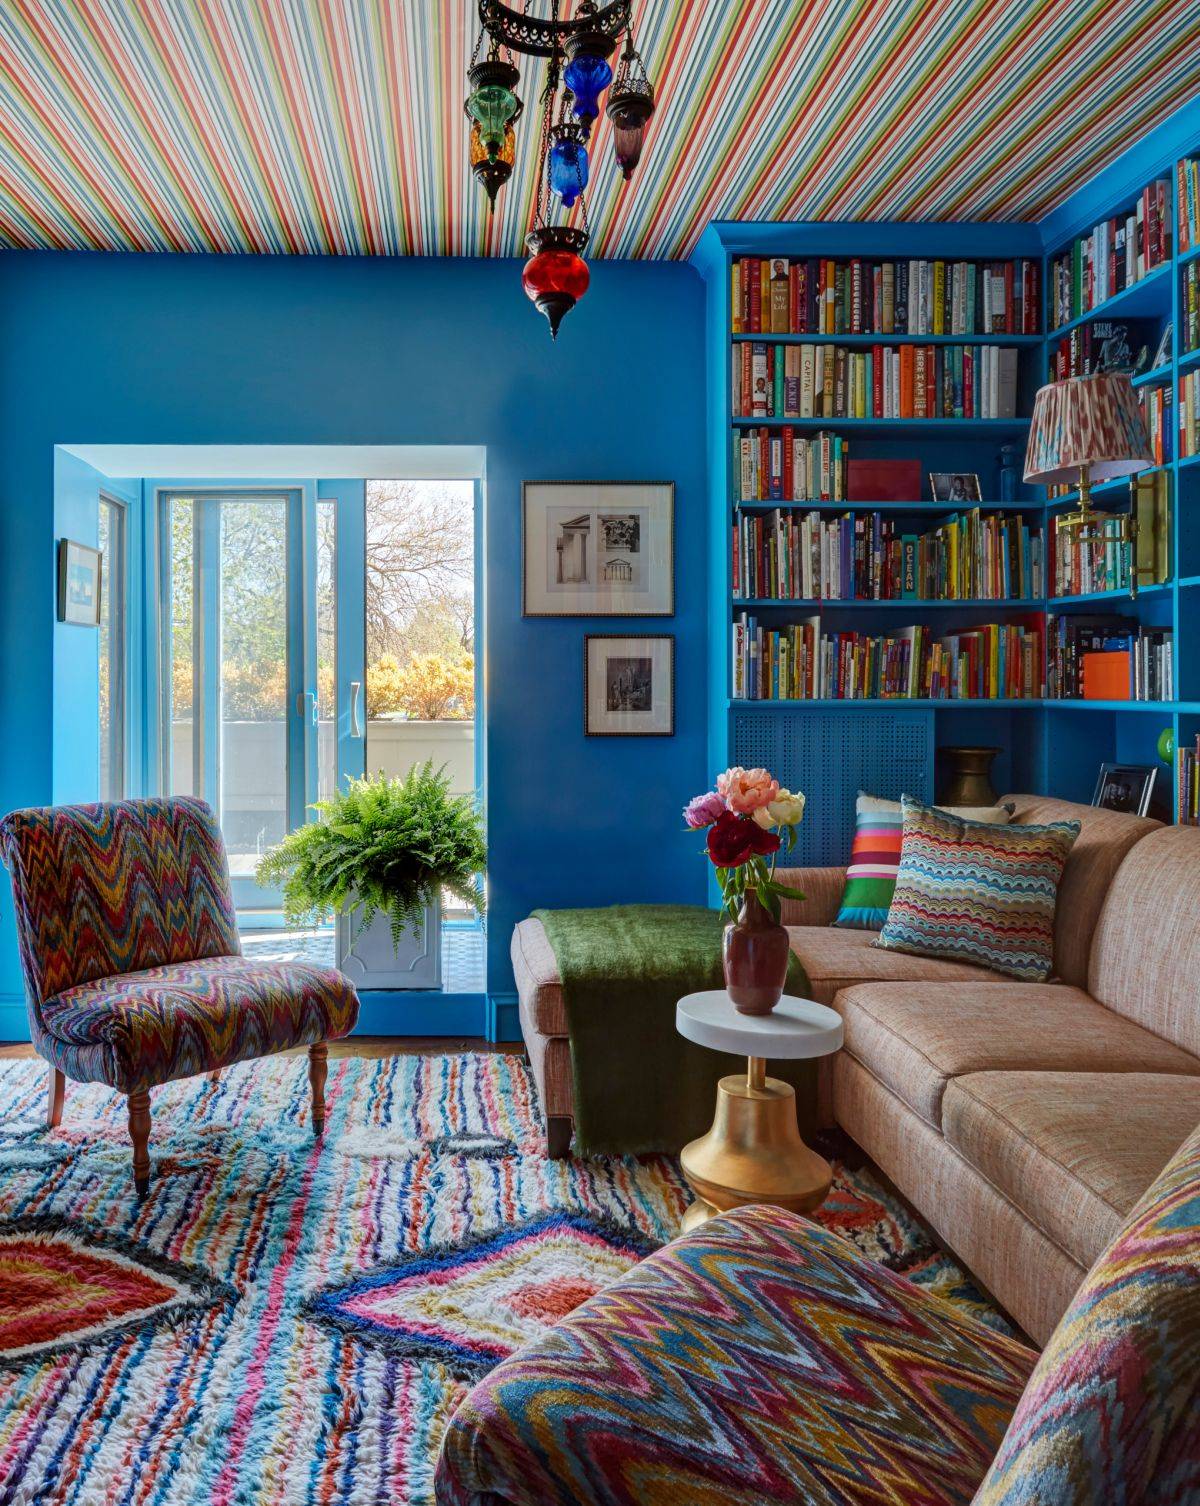 Colorful and fun home office with a large sitting area and ample shelf space